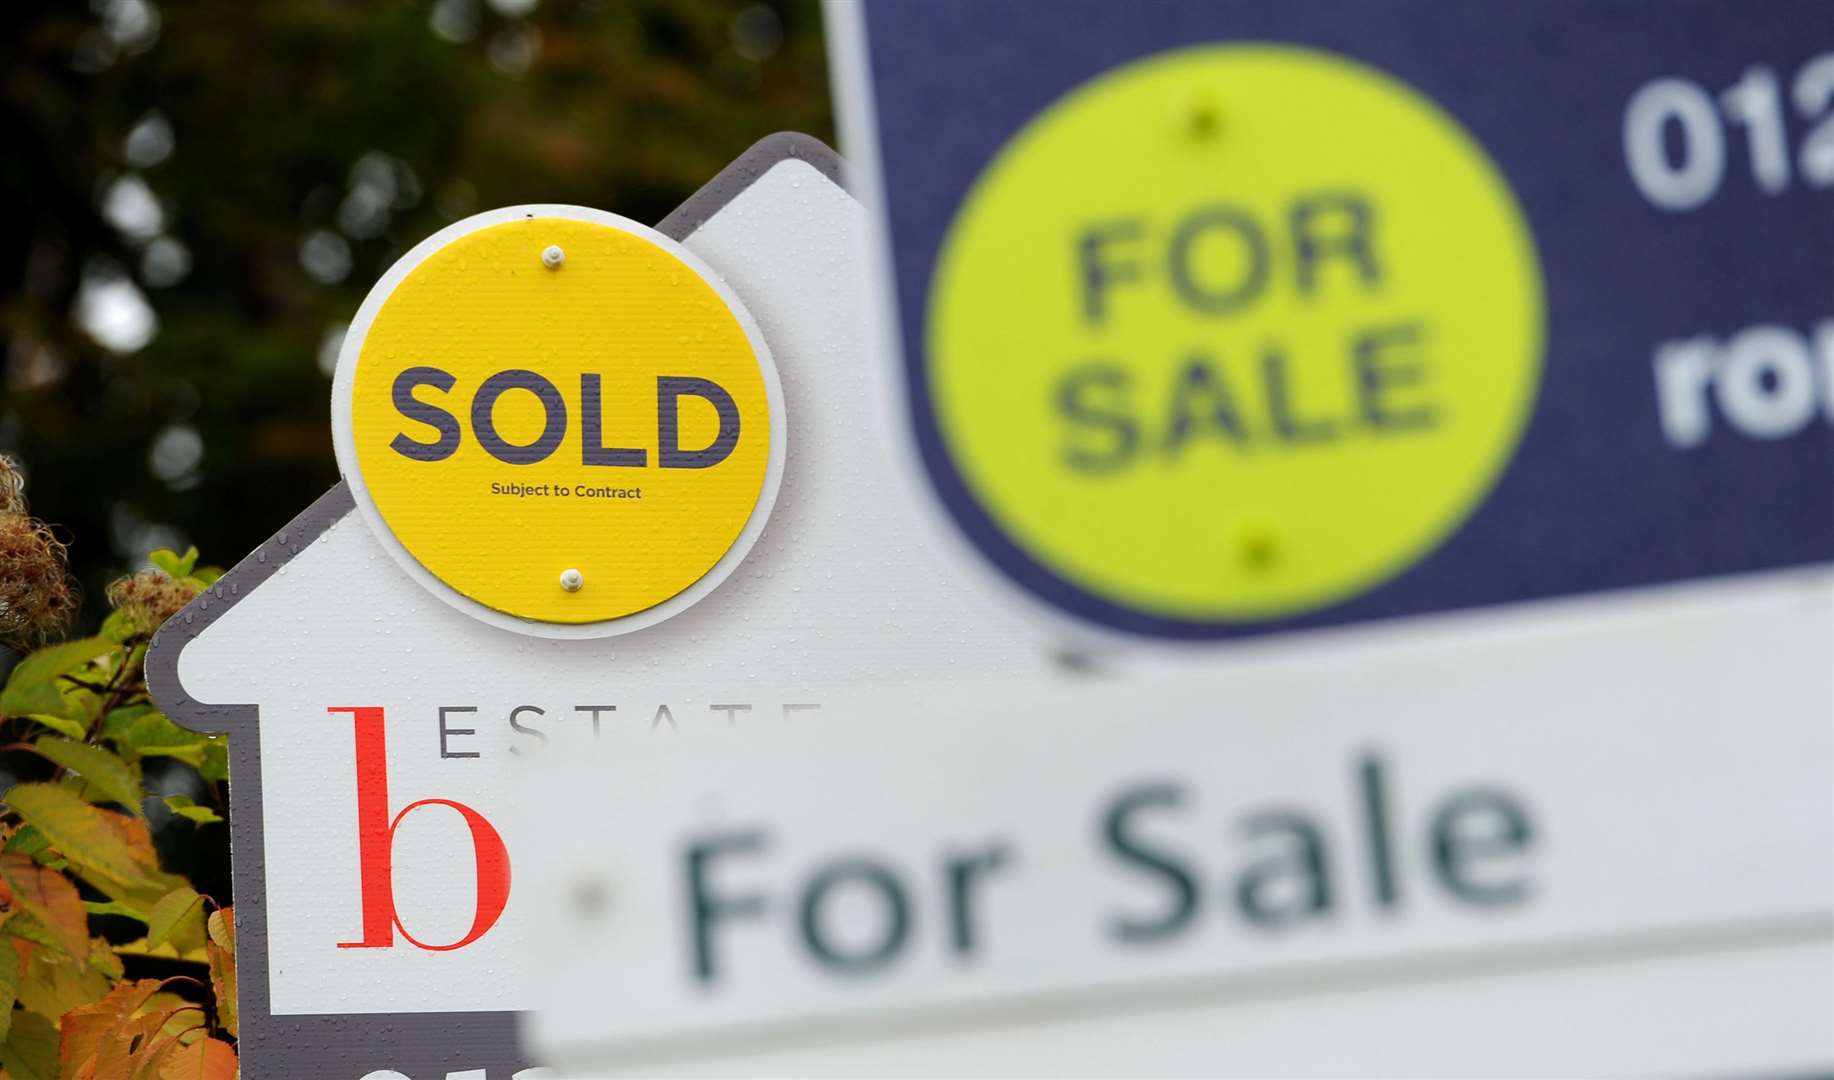 House prices continue to escalate - but can anything slow the down or put them into reverse?